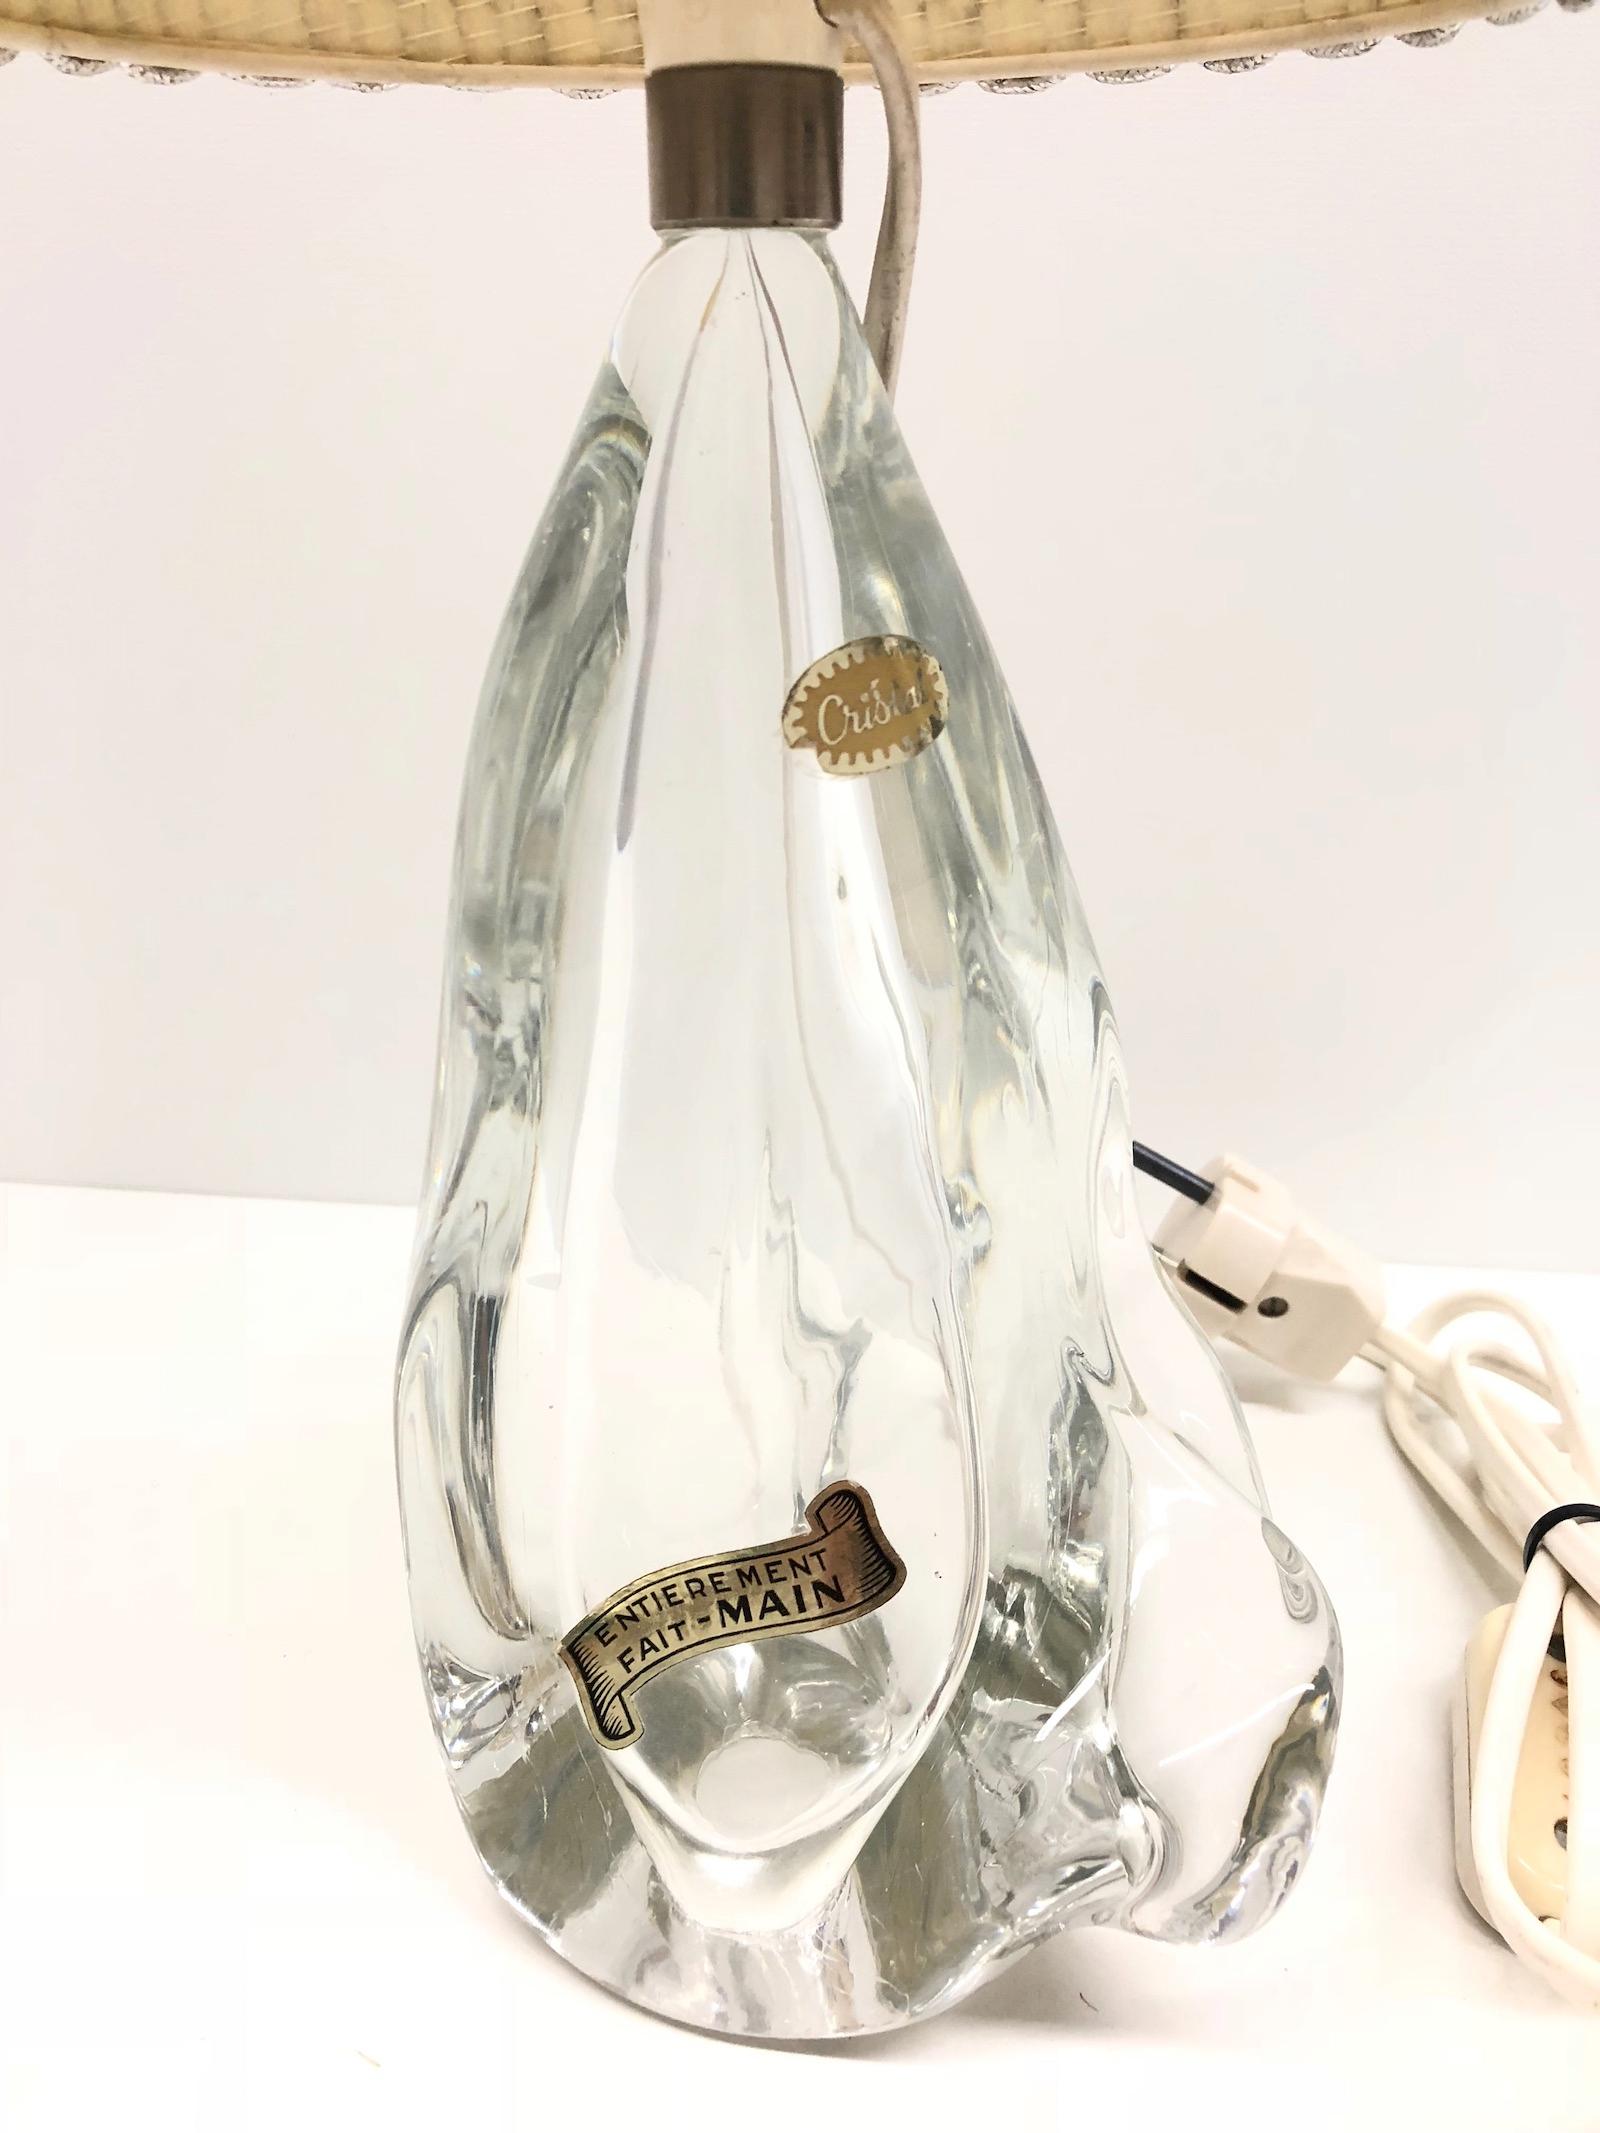 Beautiful table lamp in the form of a mountain or a rock. This light requires one European E14 candelabra bulb, up to 40 watts. It comes with the original old shade. The lamp foot is made of heavy crystal glass. The shade is made of Fabric and wire.